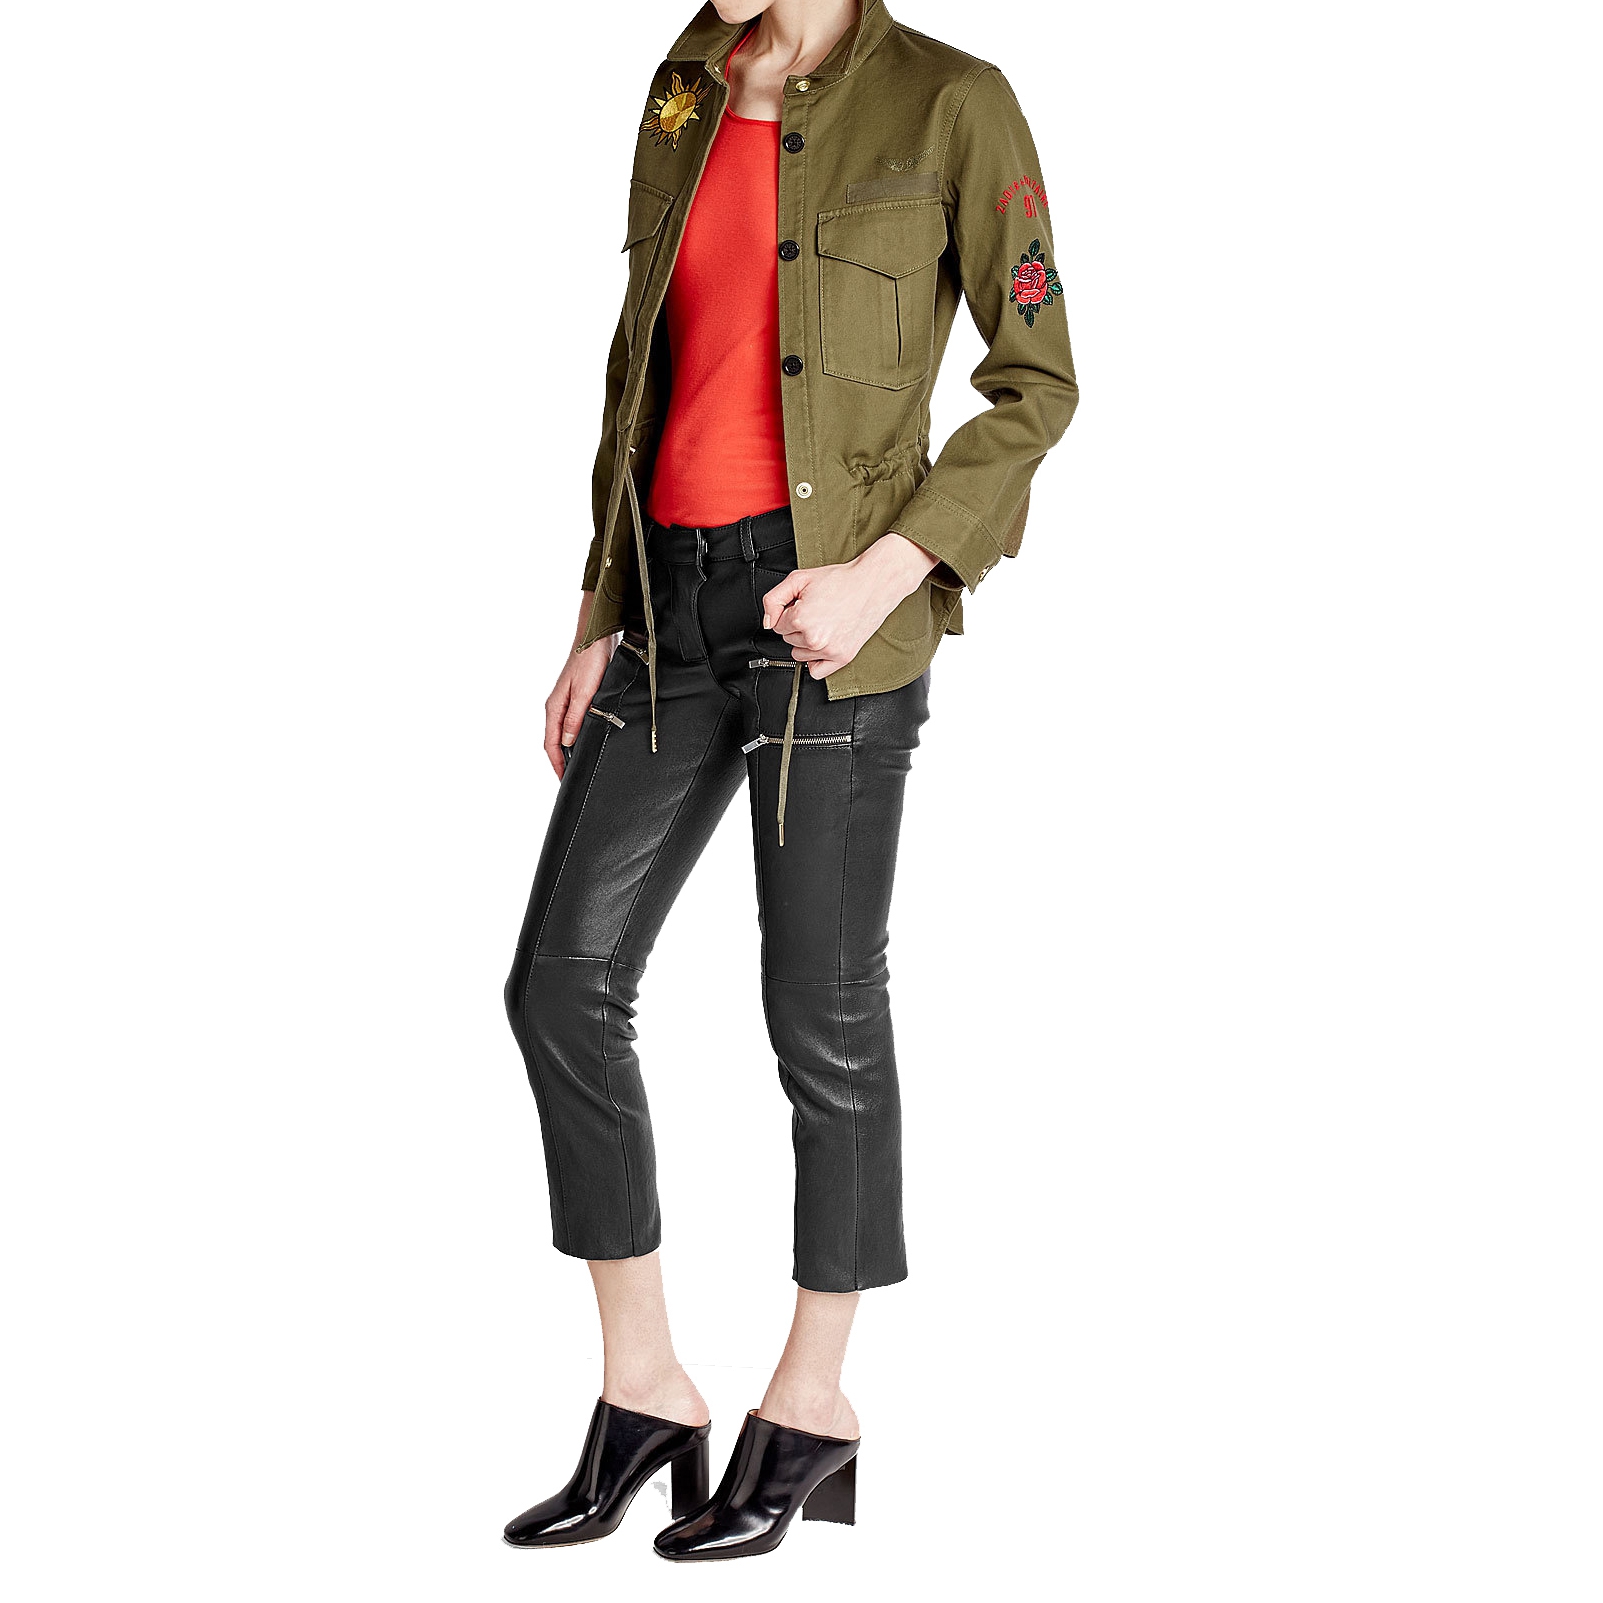 Zadig & Voltaire Embroidered Cotton Military Shirt